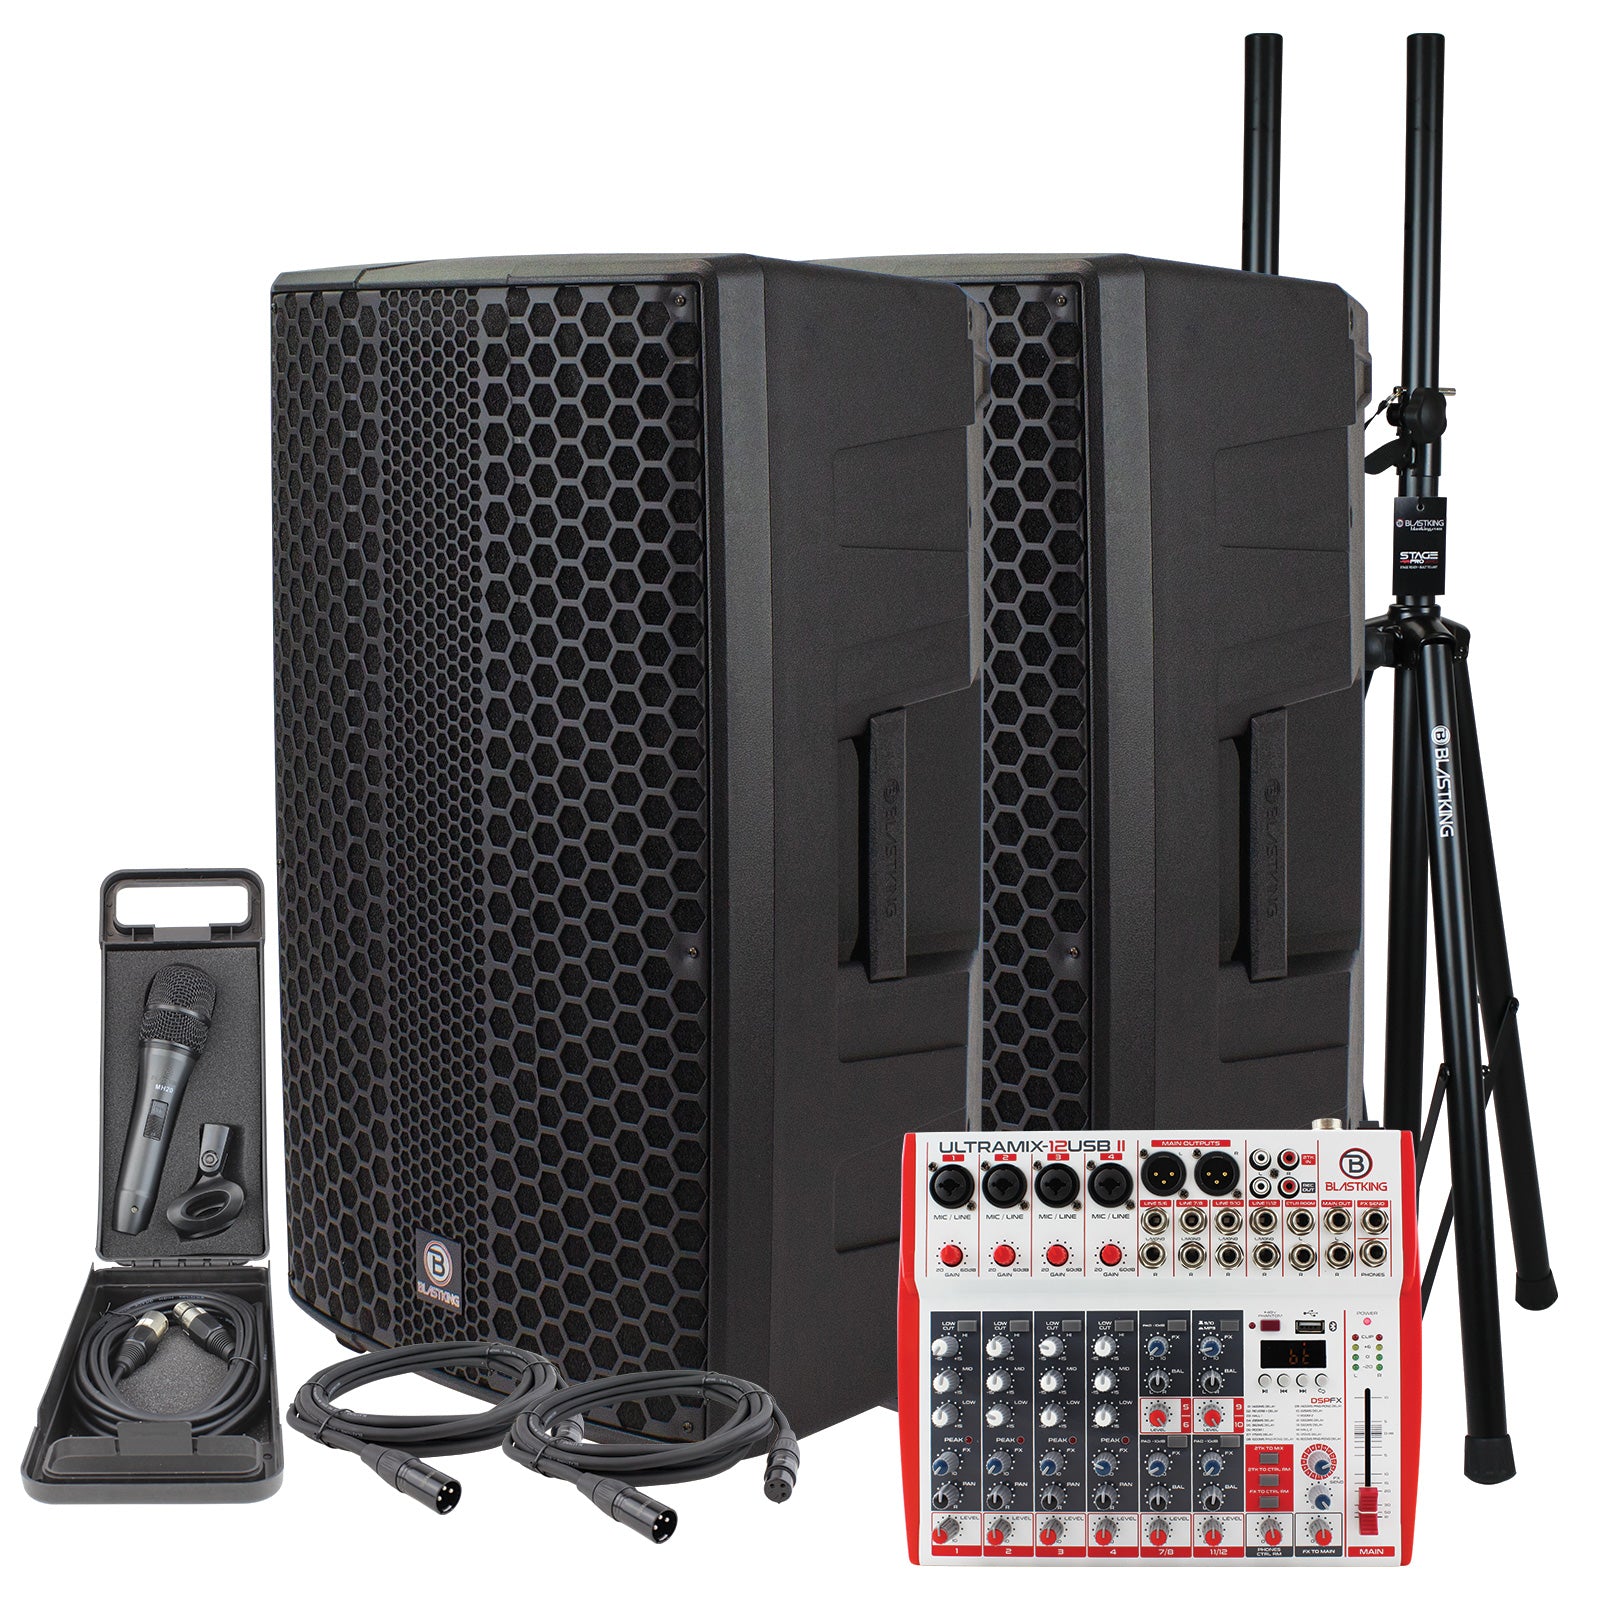 Blastking NOVOP15A-PK1 (2) 15” NOVO-P15A Speaker 1200 Watts + 12 Channel Analog Mixing Console + Stands + Microphone + Cables